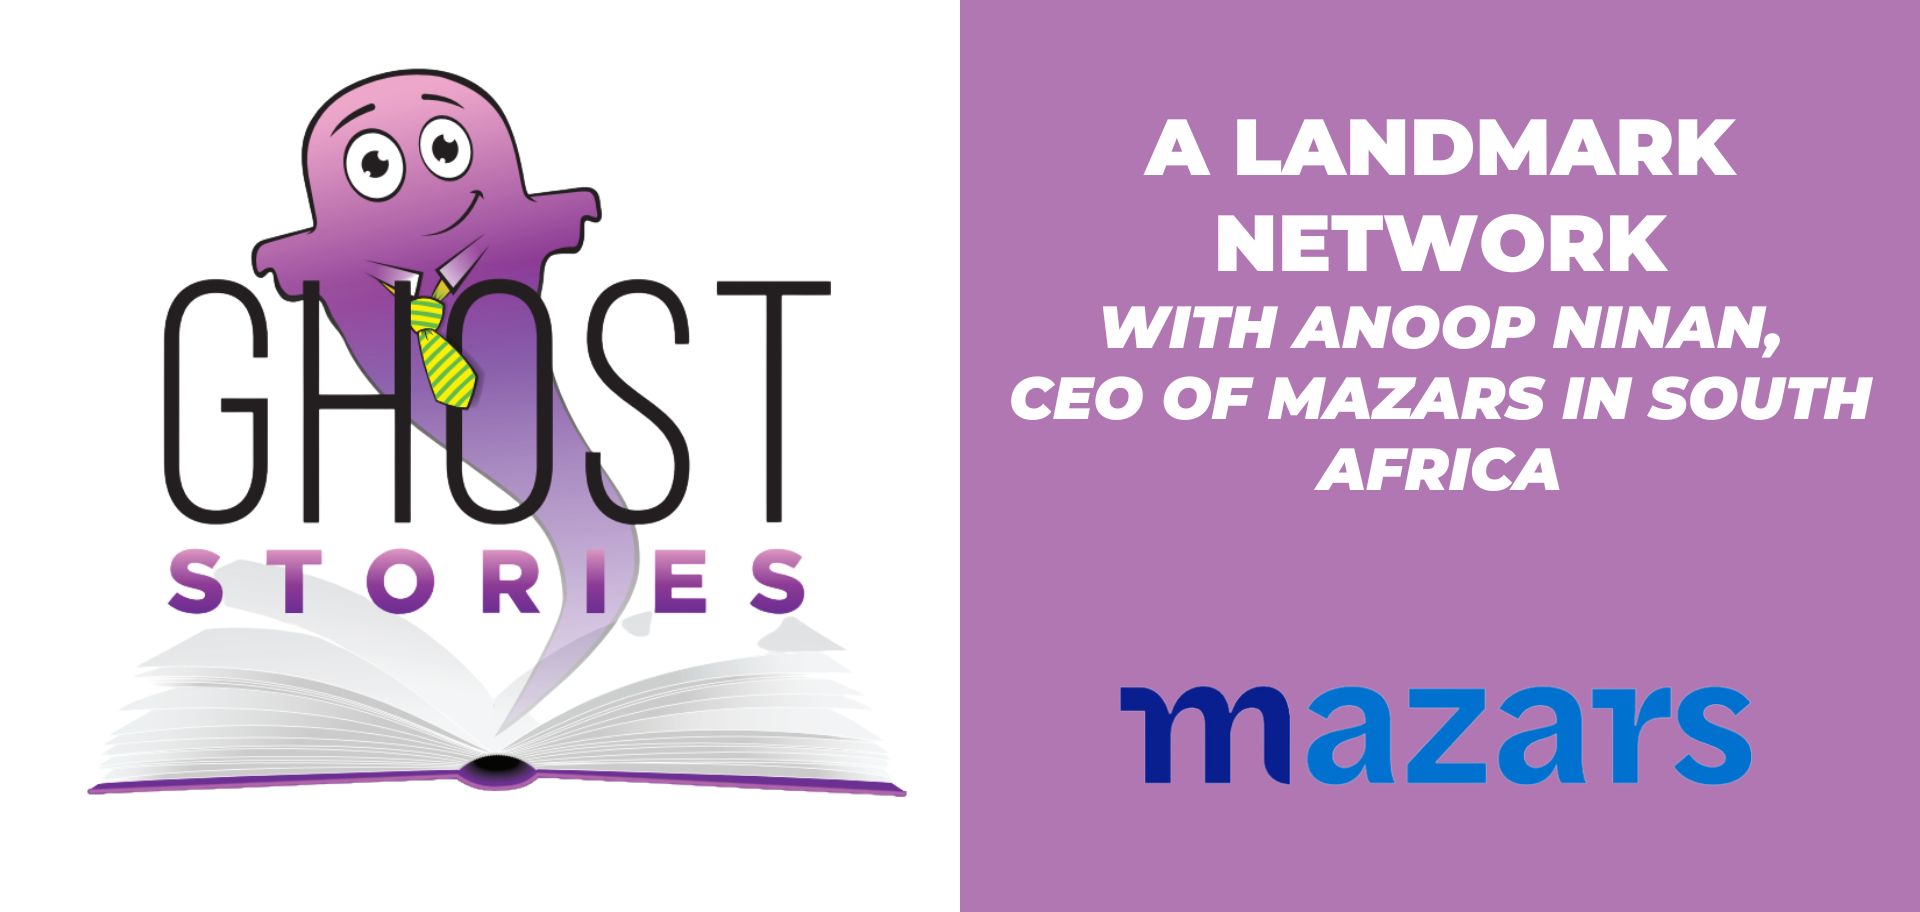 Ghost Stories Ep25: A Landmark Network (with Anoop Ninan, CEO of Mazars in South Africa)